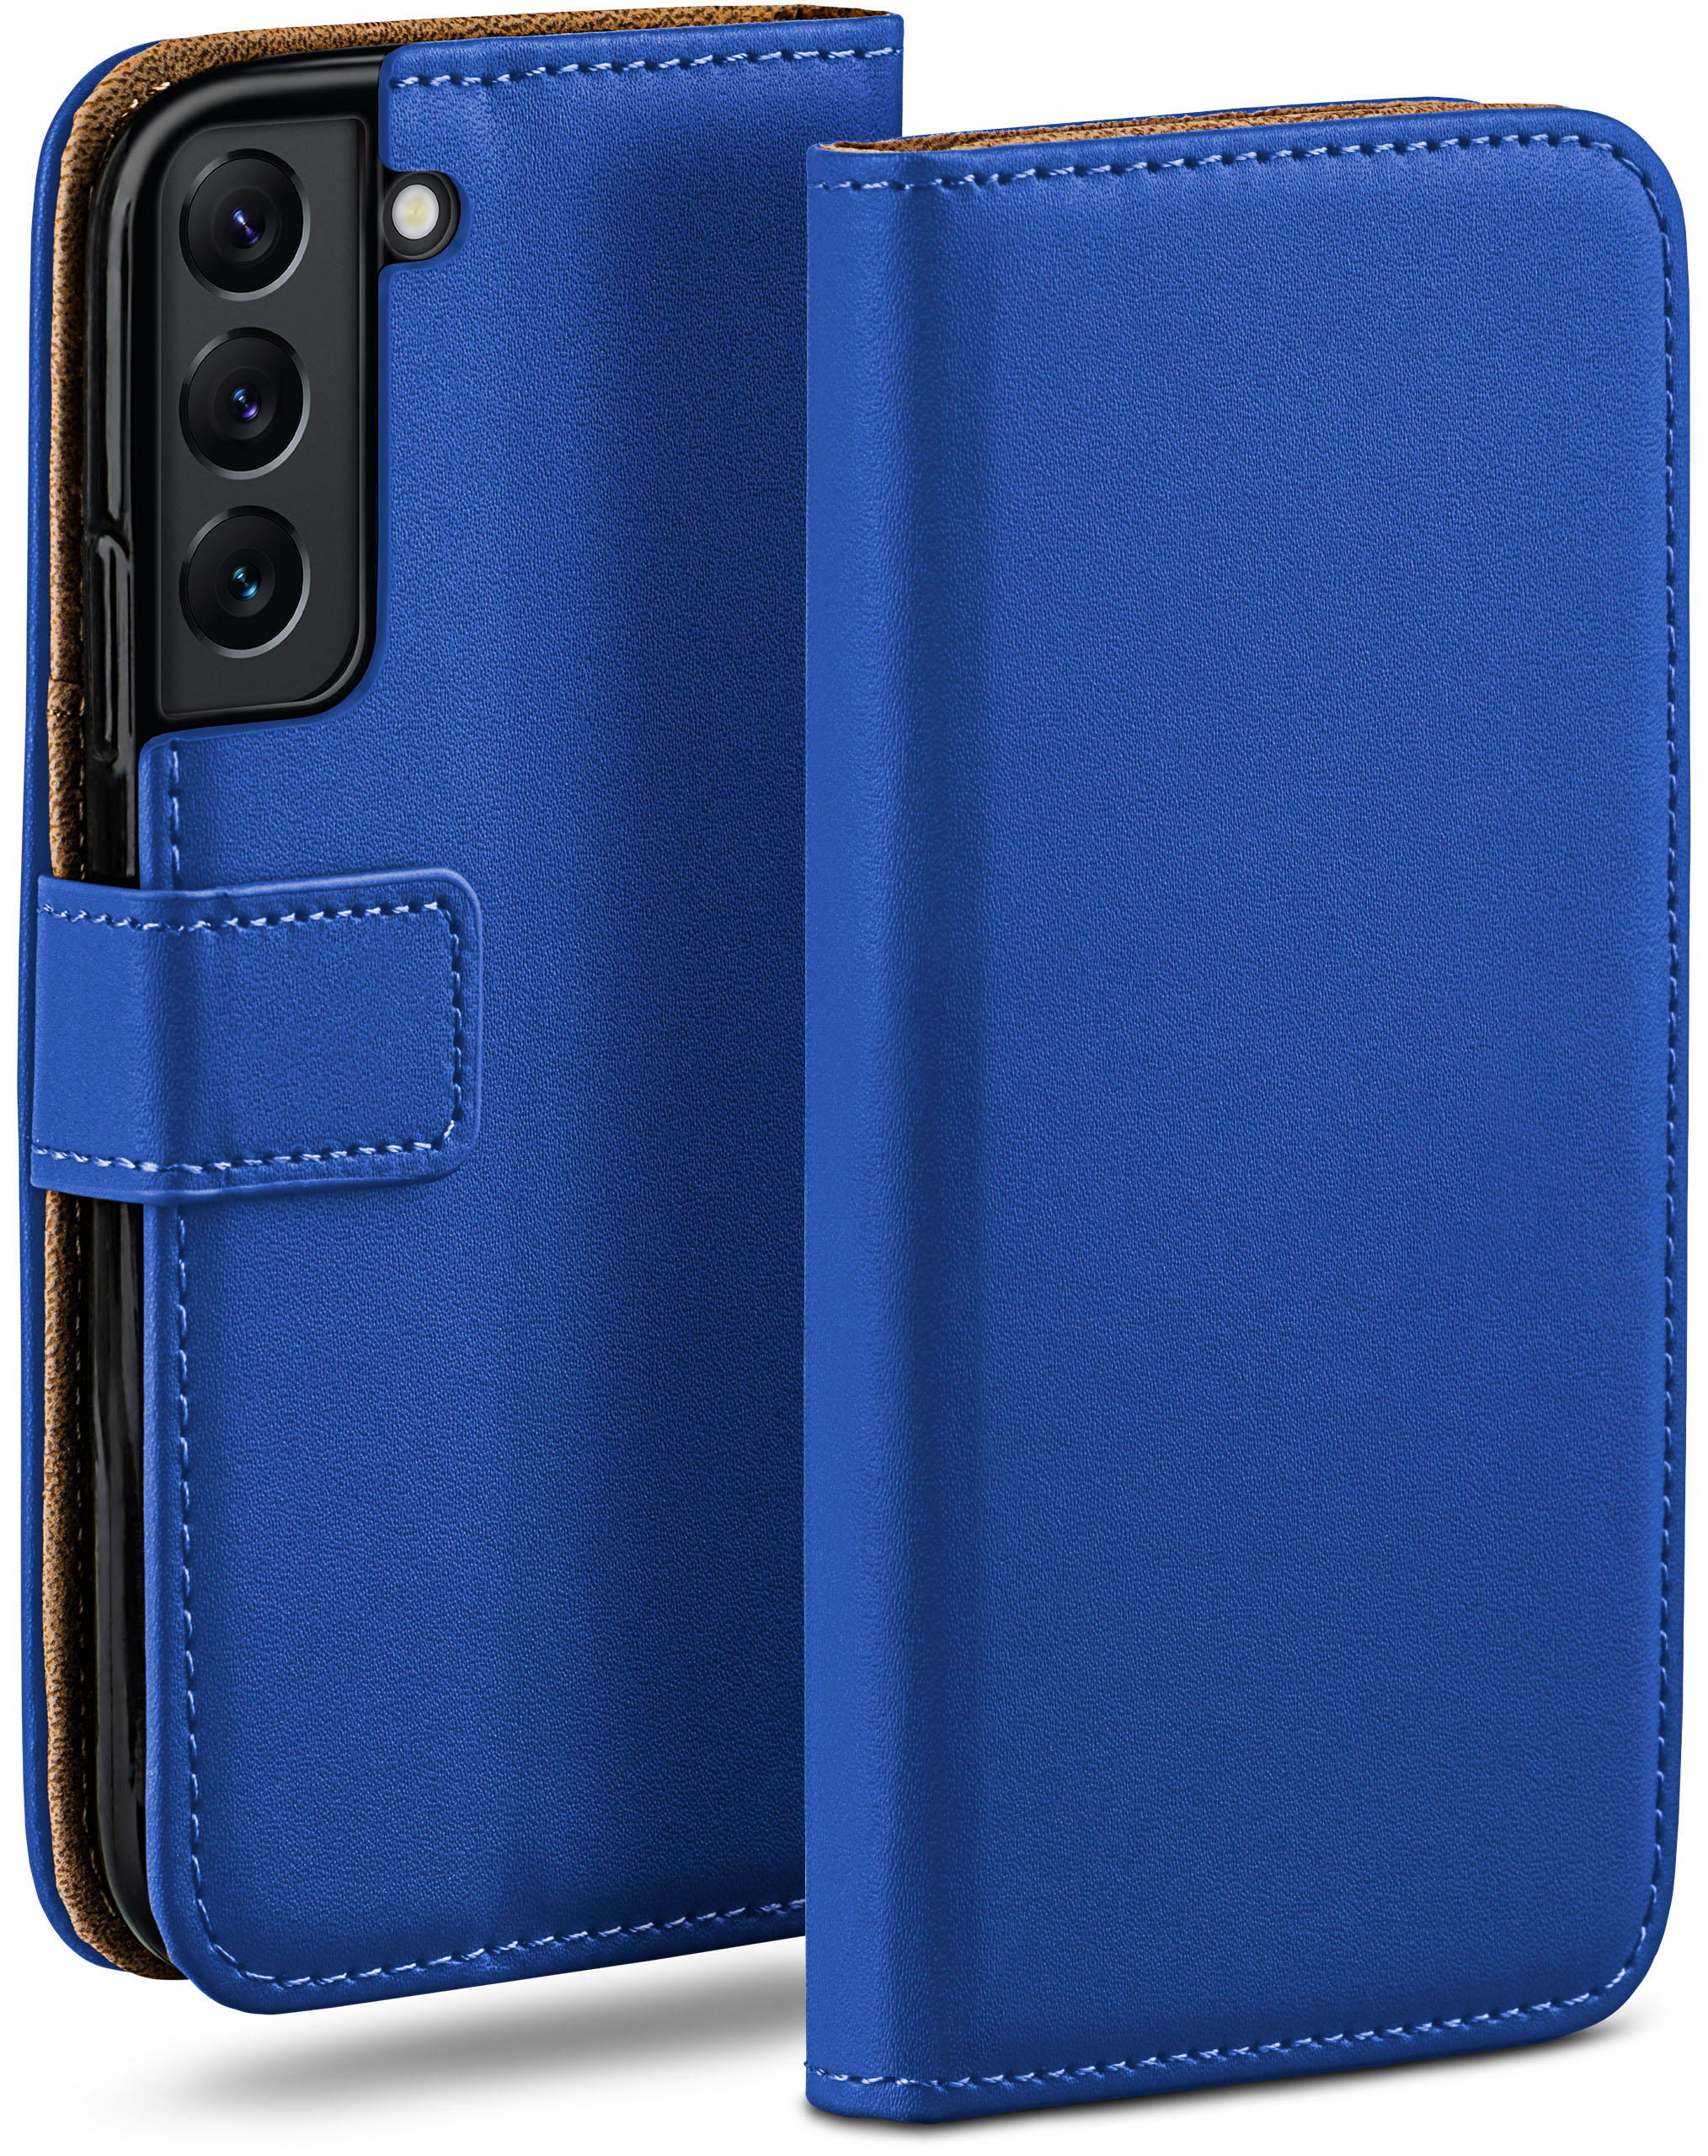 MOEX Book Case, Bookcover, Samsung, Galaxy S22, Royal-Blue